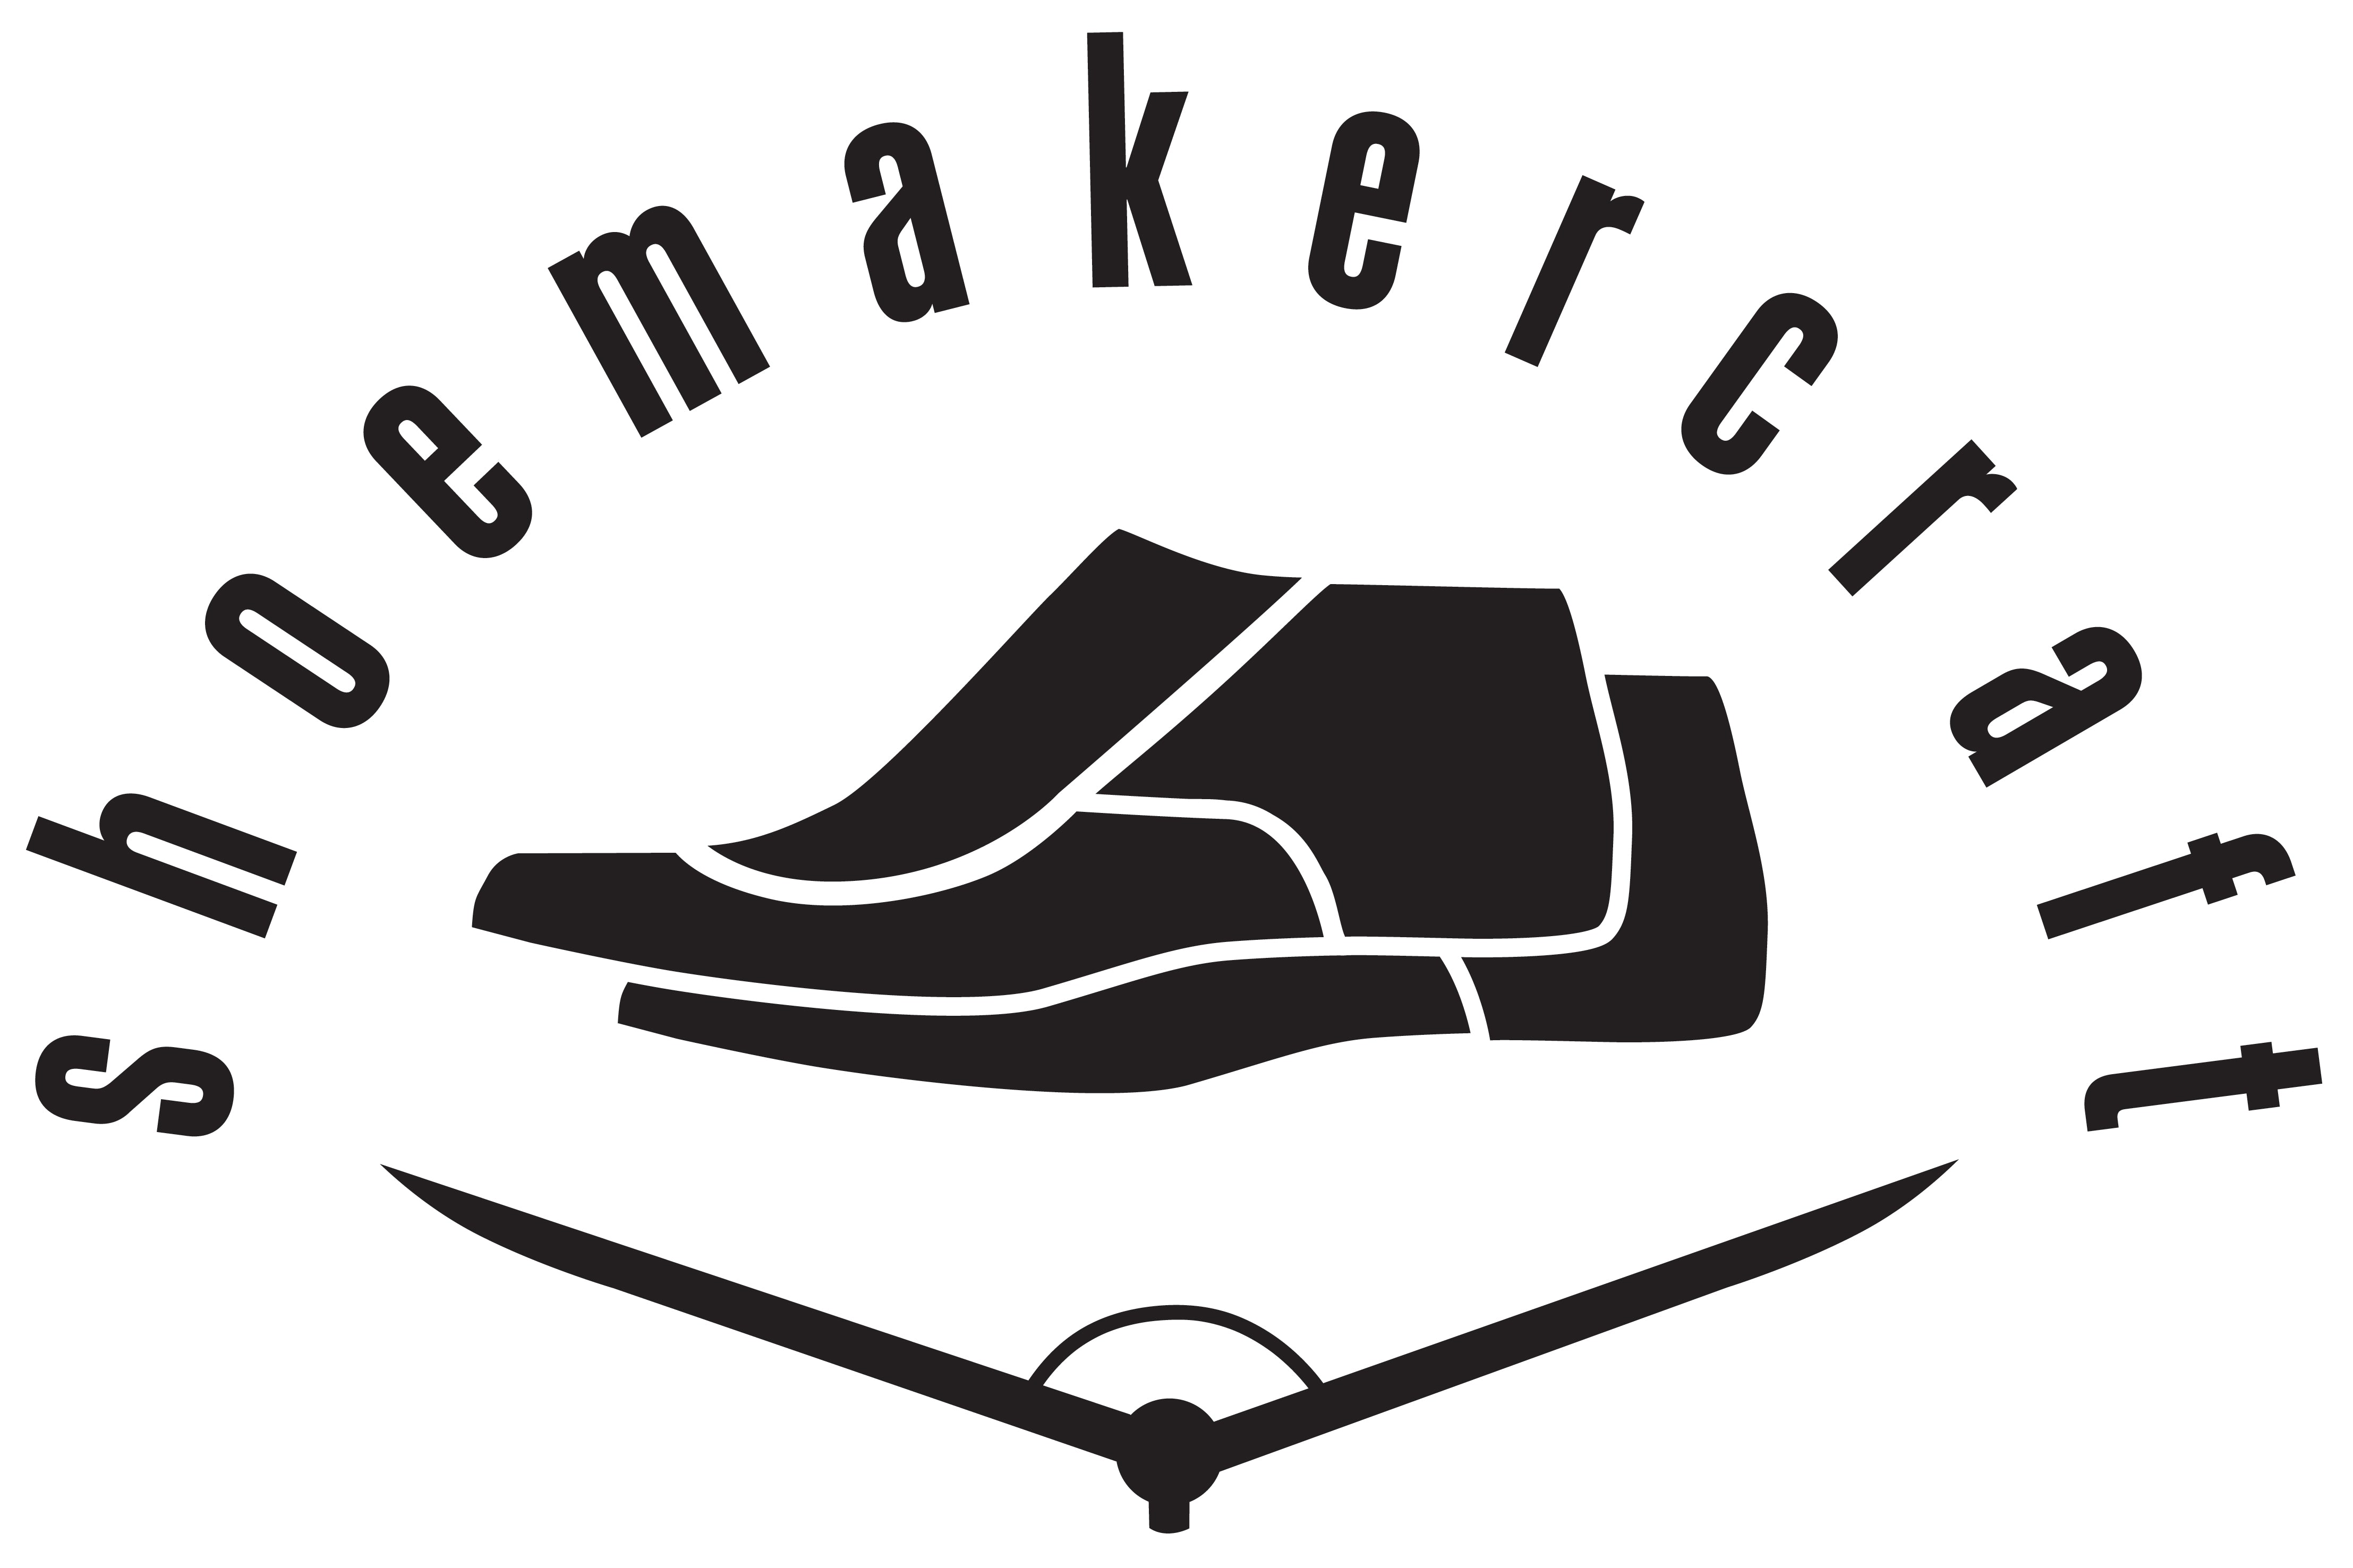 Quality shoemaker tools, materials and wooden shoe lasts – Shoemakercraft